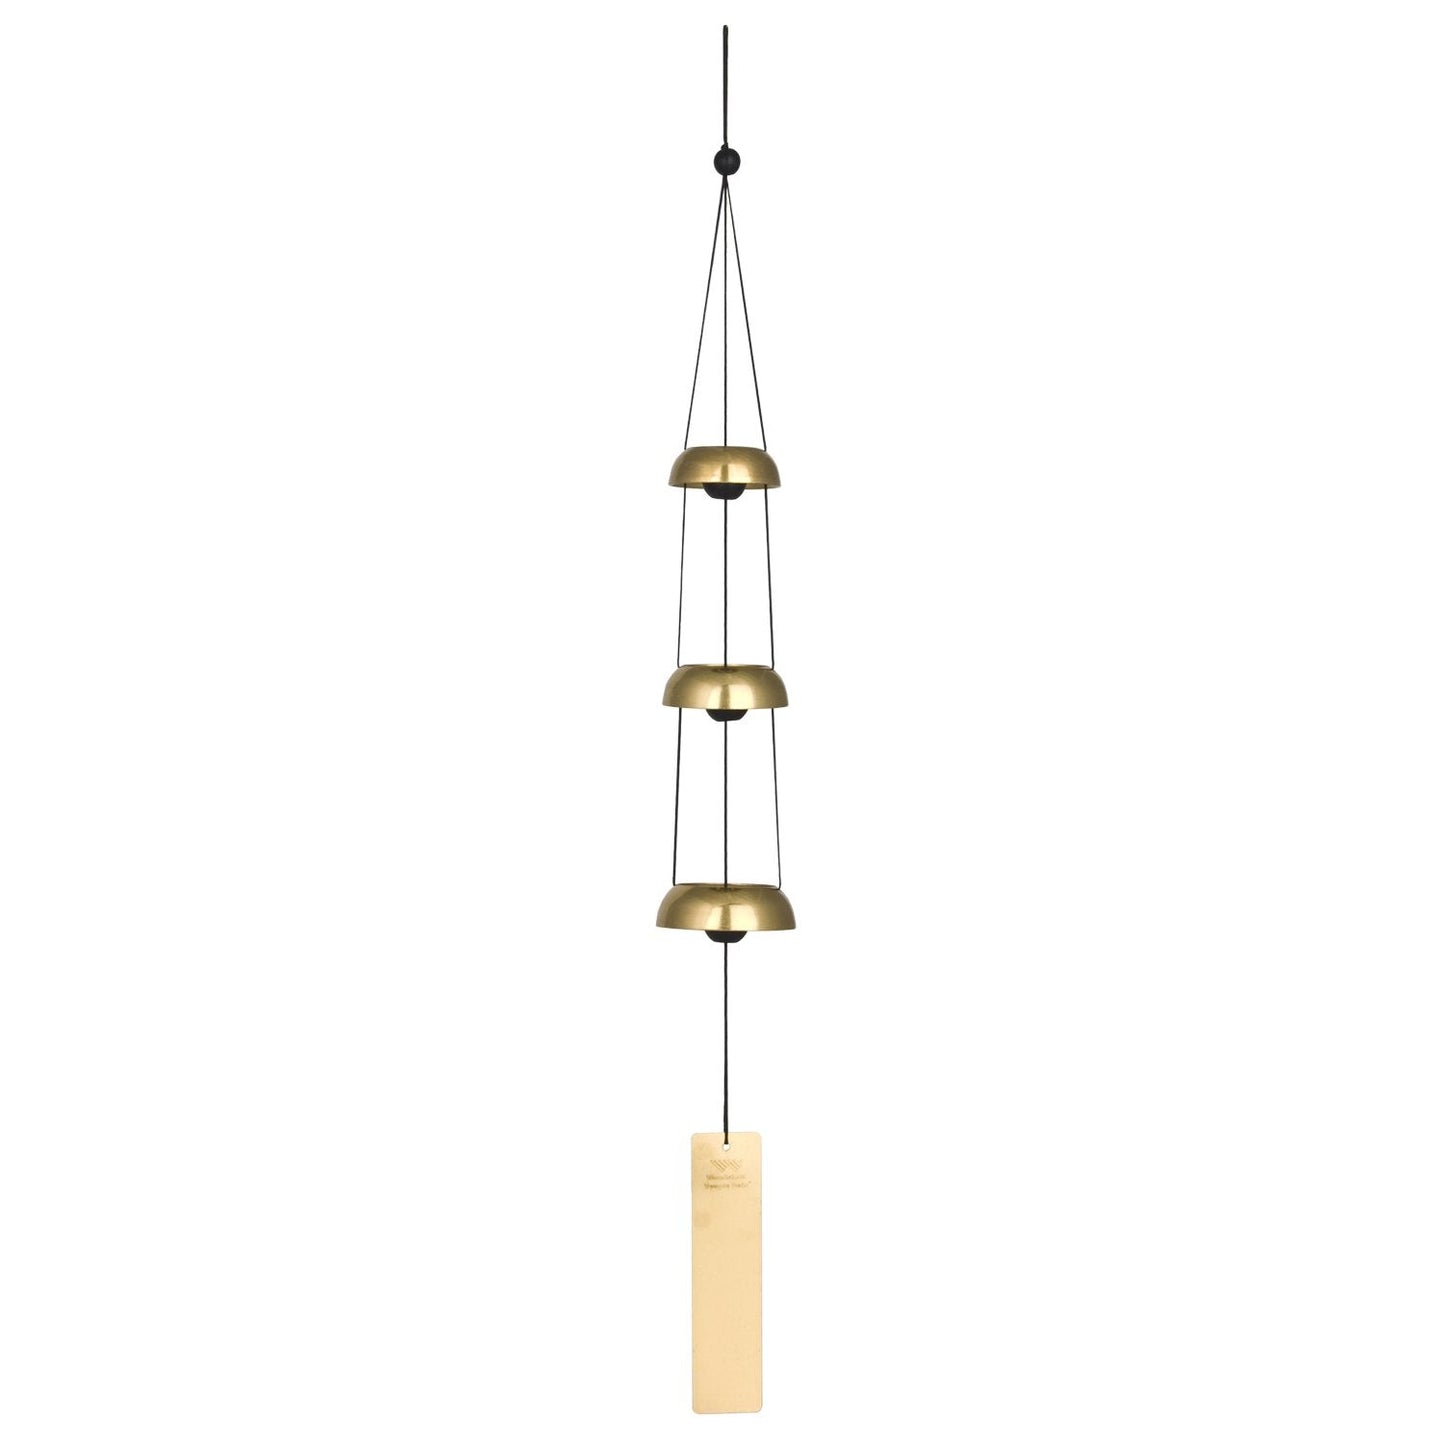 Temple Bells - Trio, Brass - by Woodstock Chimes